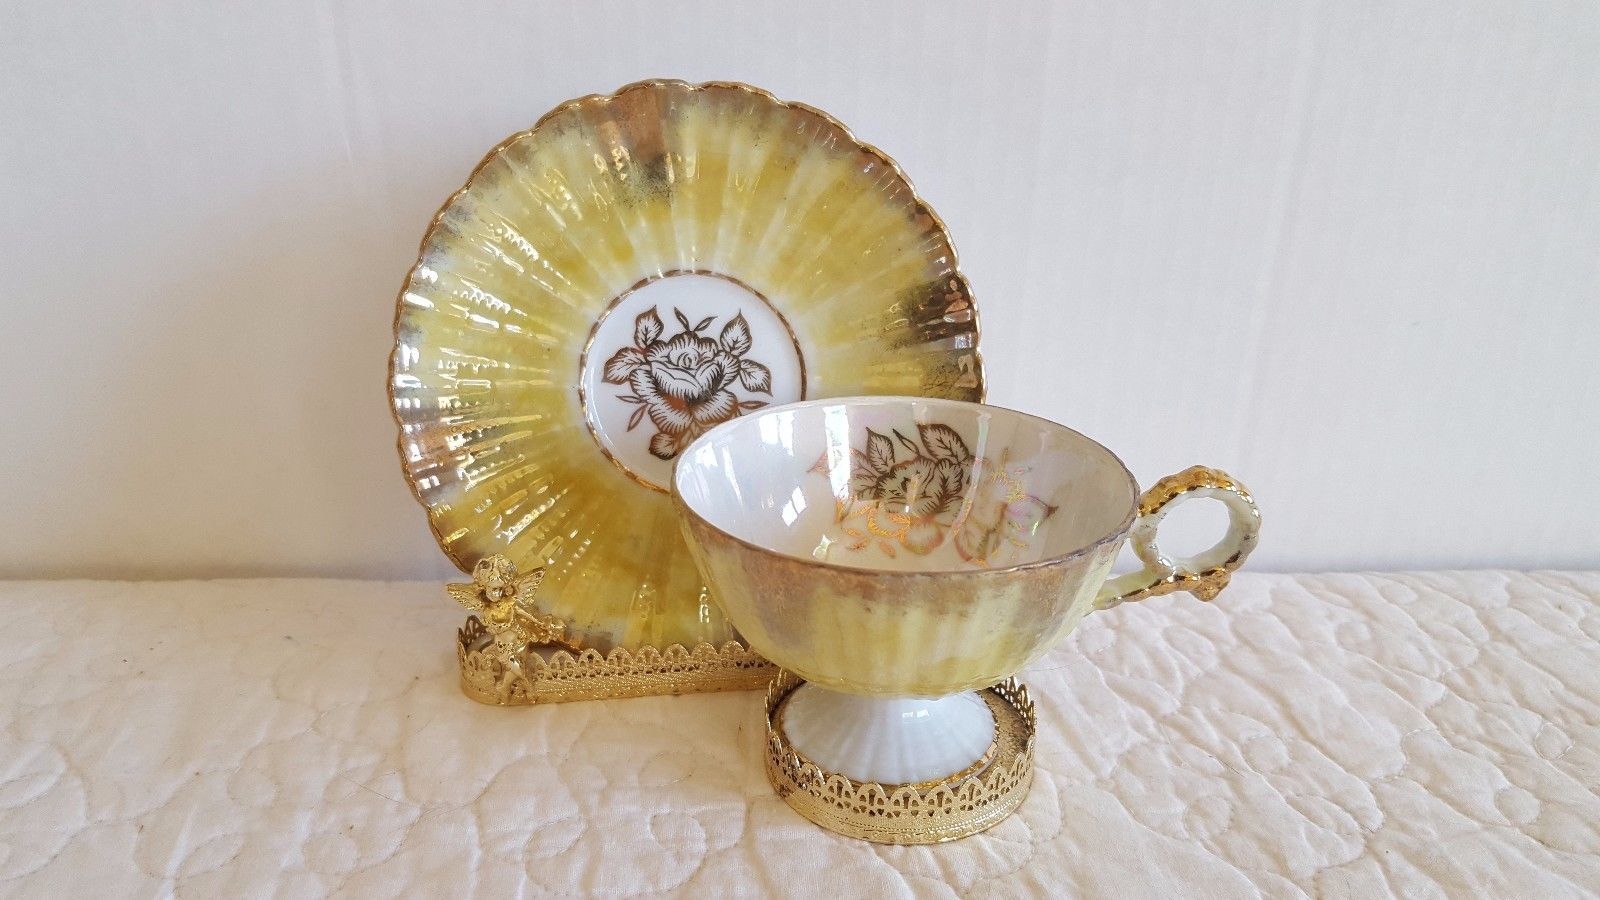 Vintage Lefton Handpainted Scallop Rim Gold Rose Footed Tea Cup and Saucer EUC - $14.99